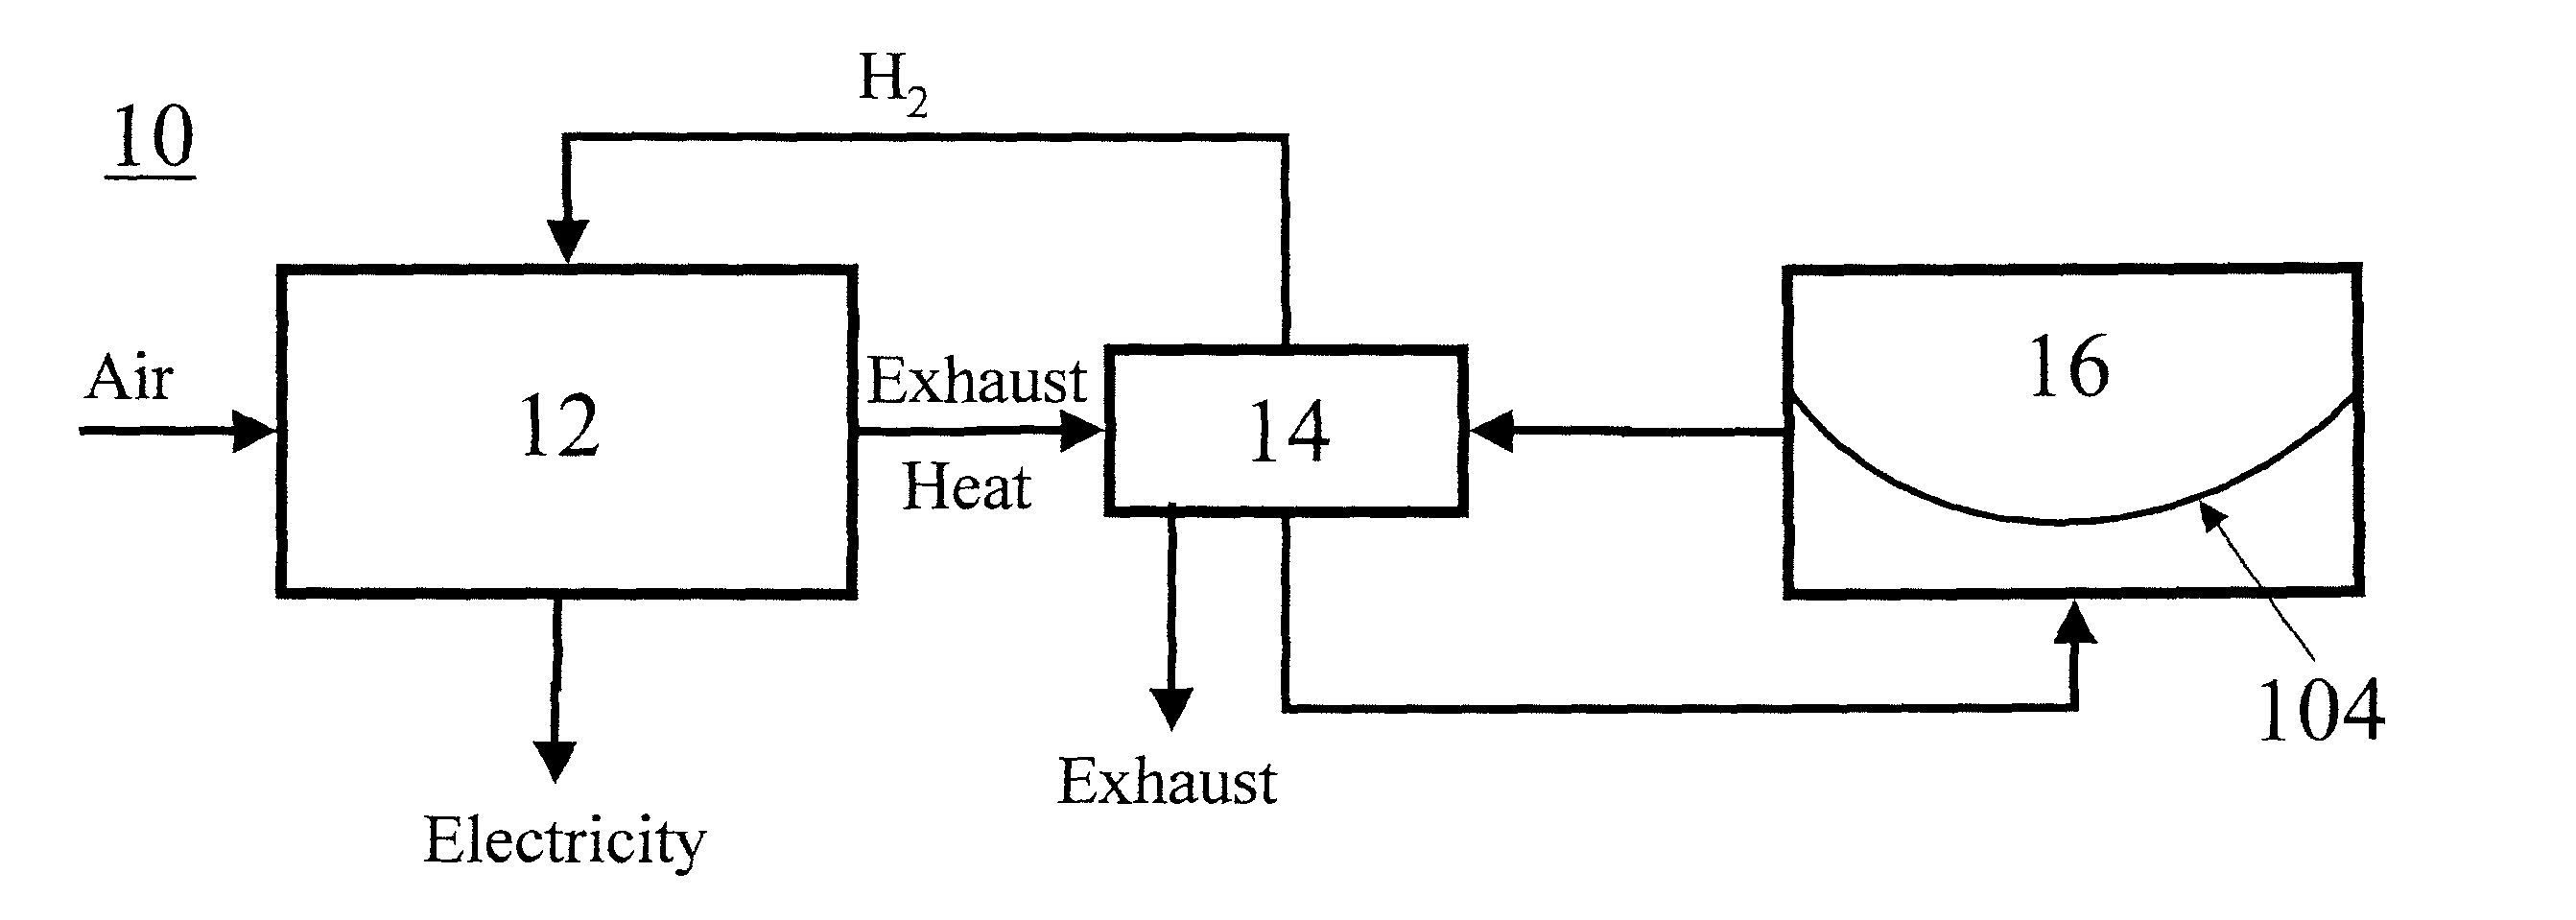 Hydrogen storage material and related system